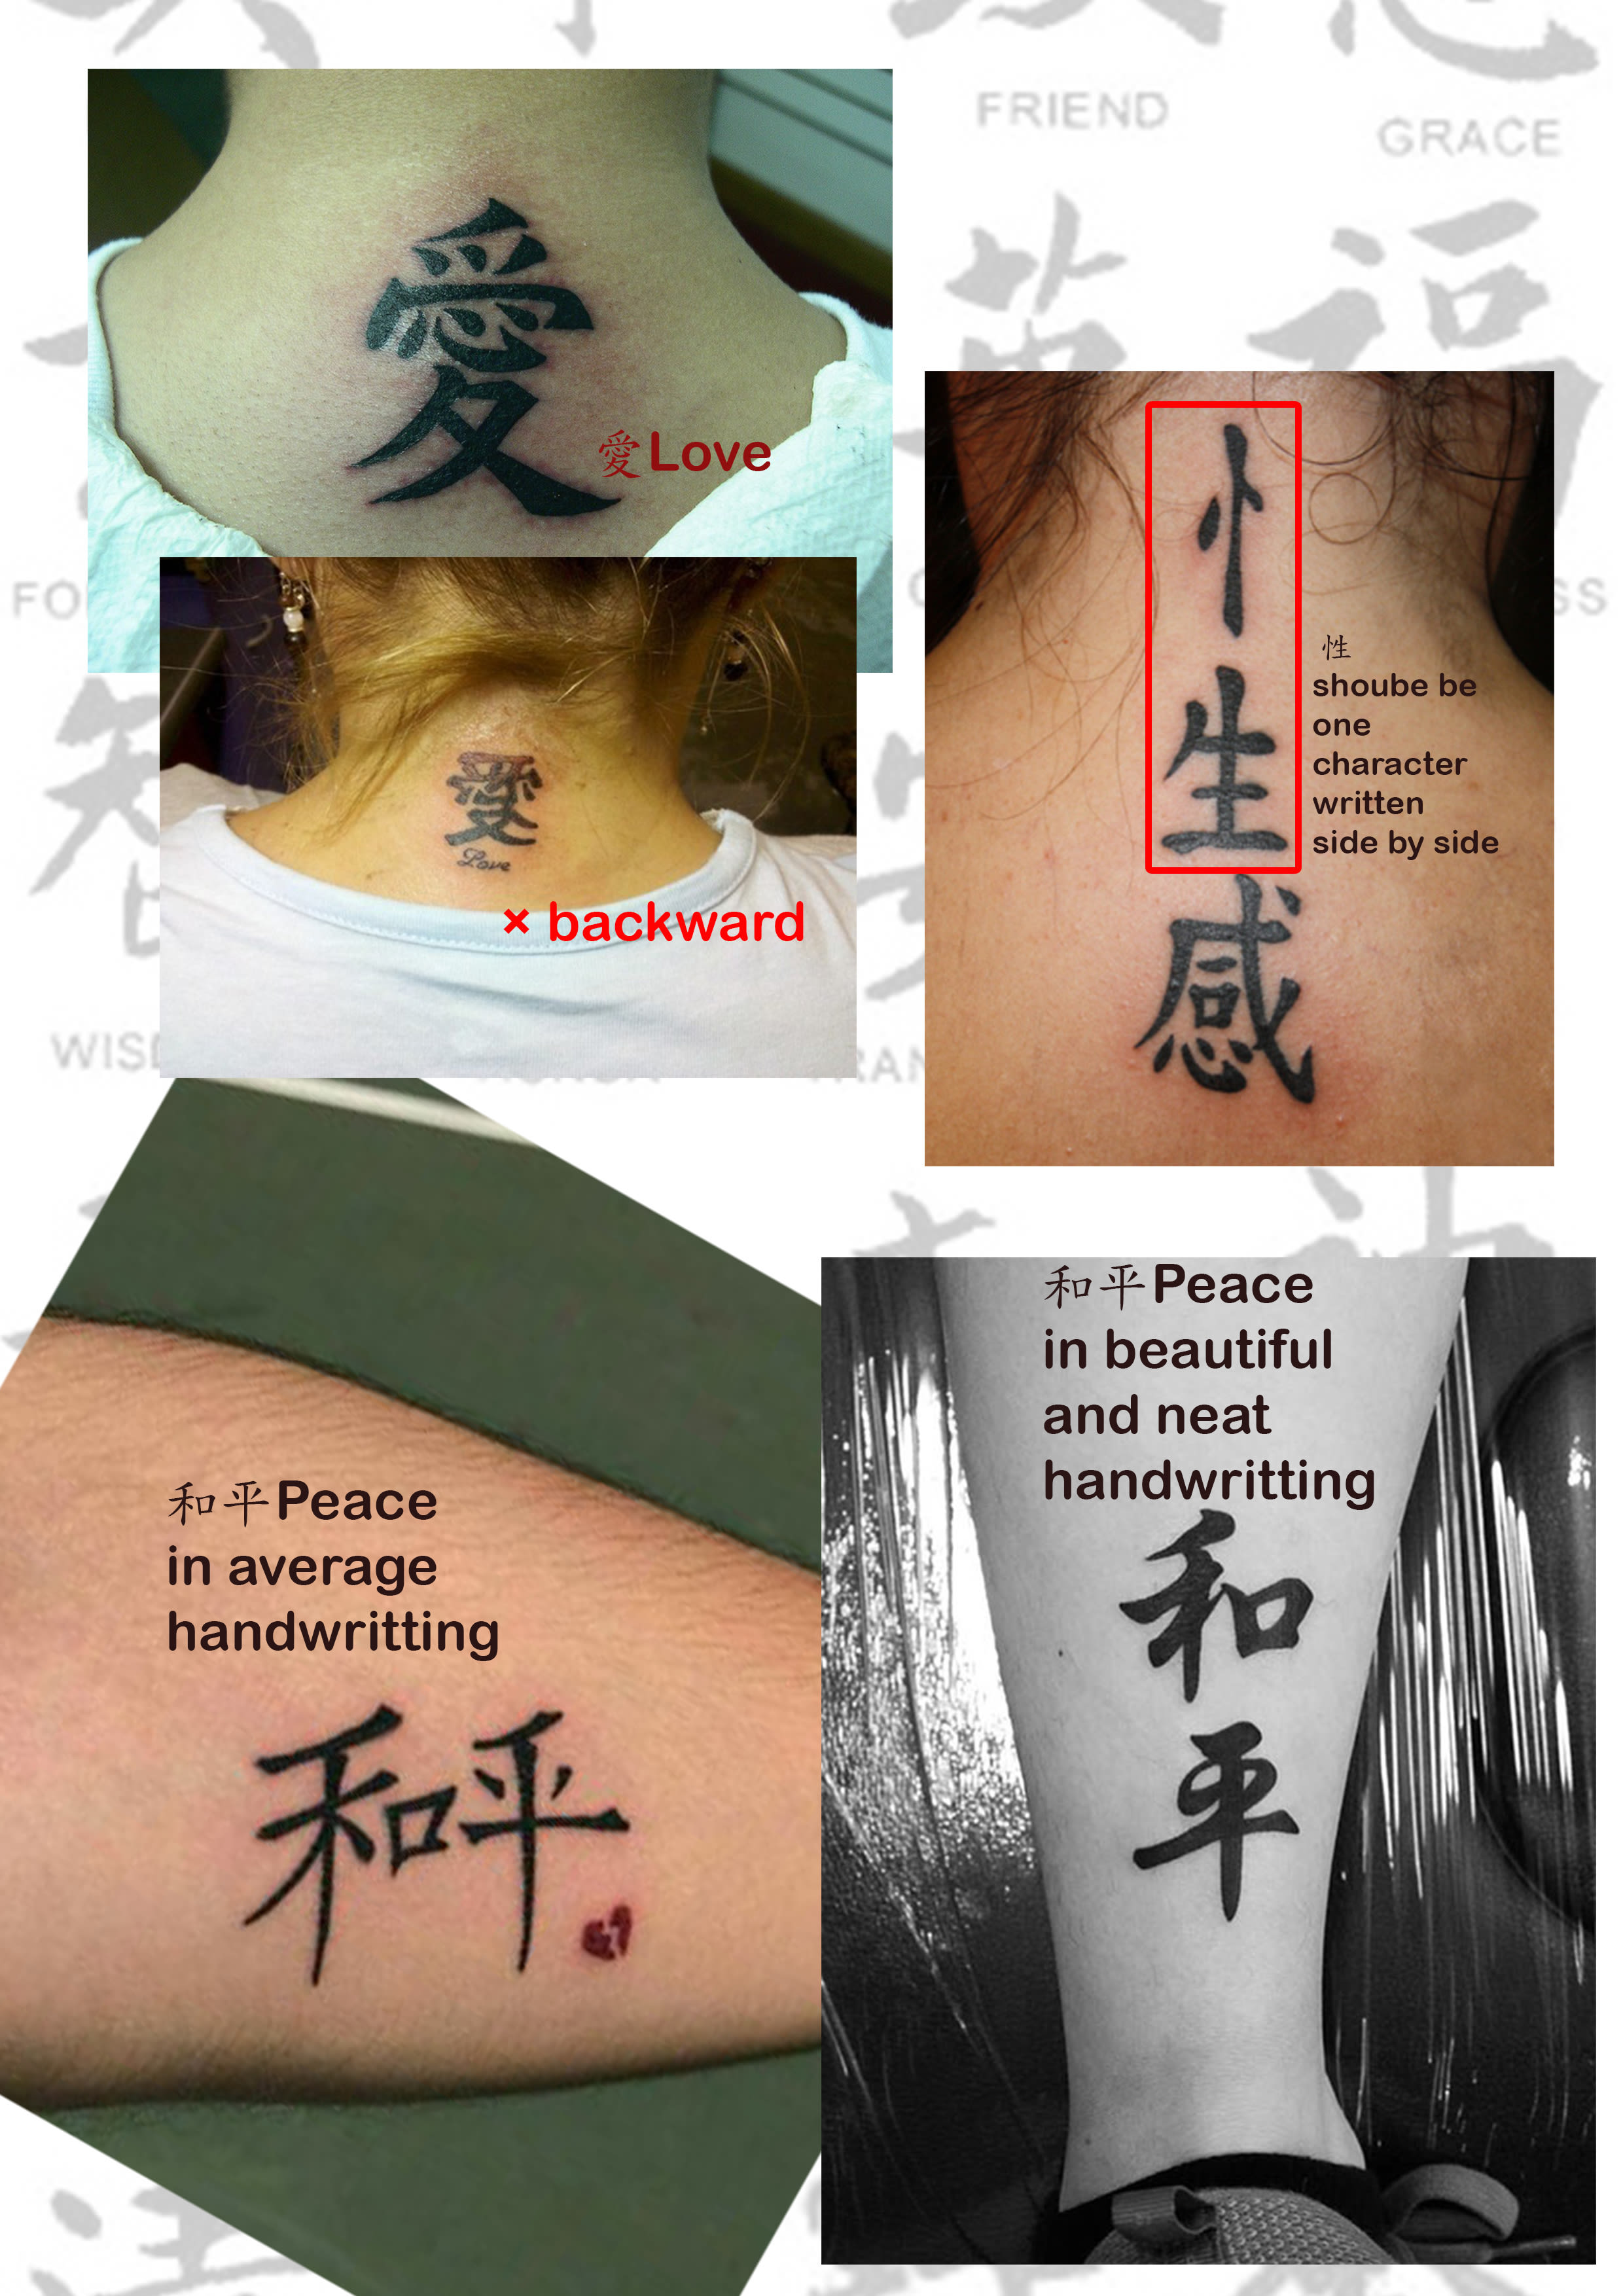 Translate or verify your tattoo in traditional chinese by Kes_li | Fiverr